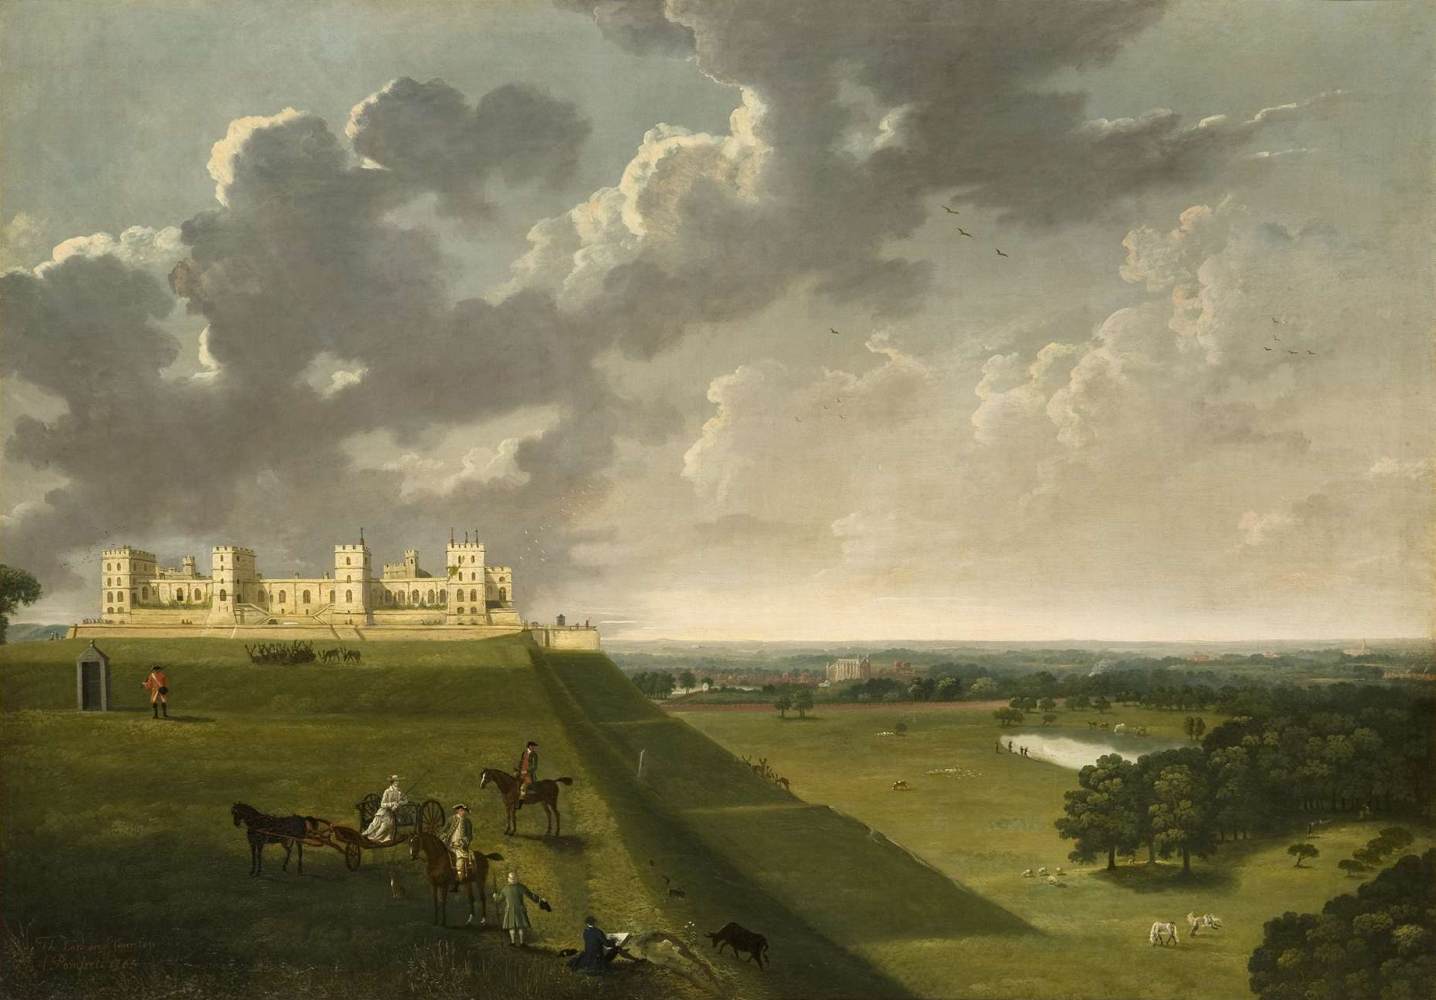 View of Windsor Castle